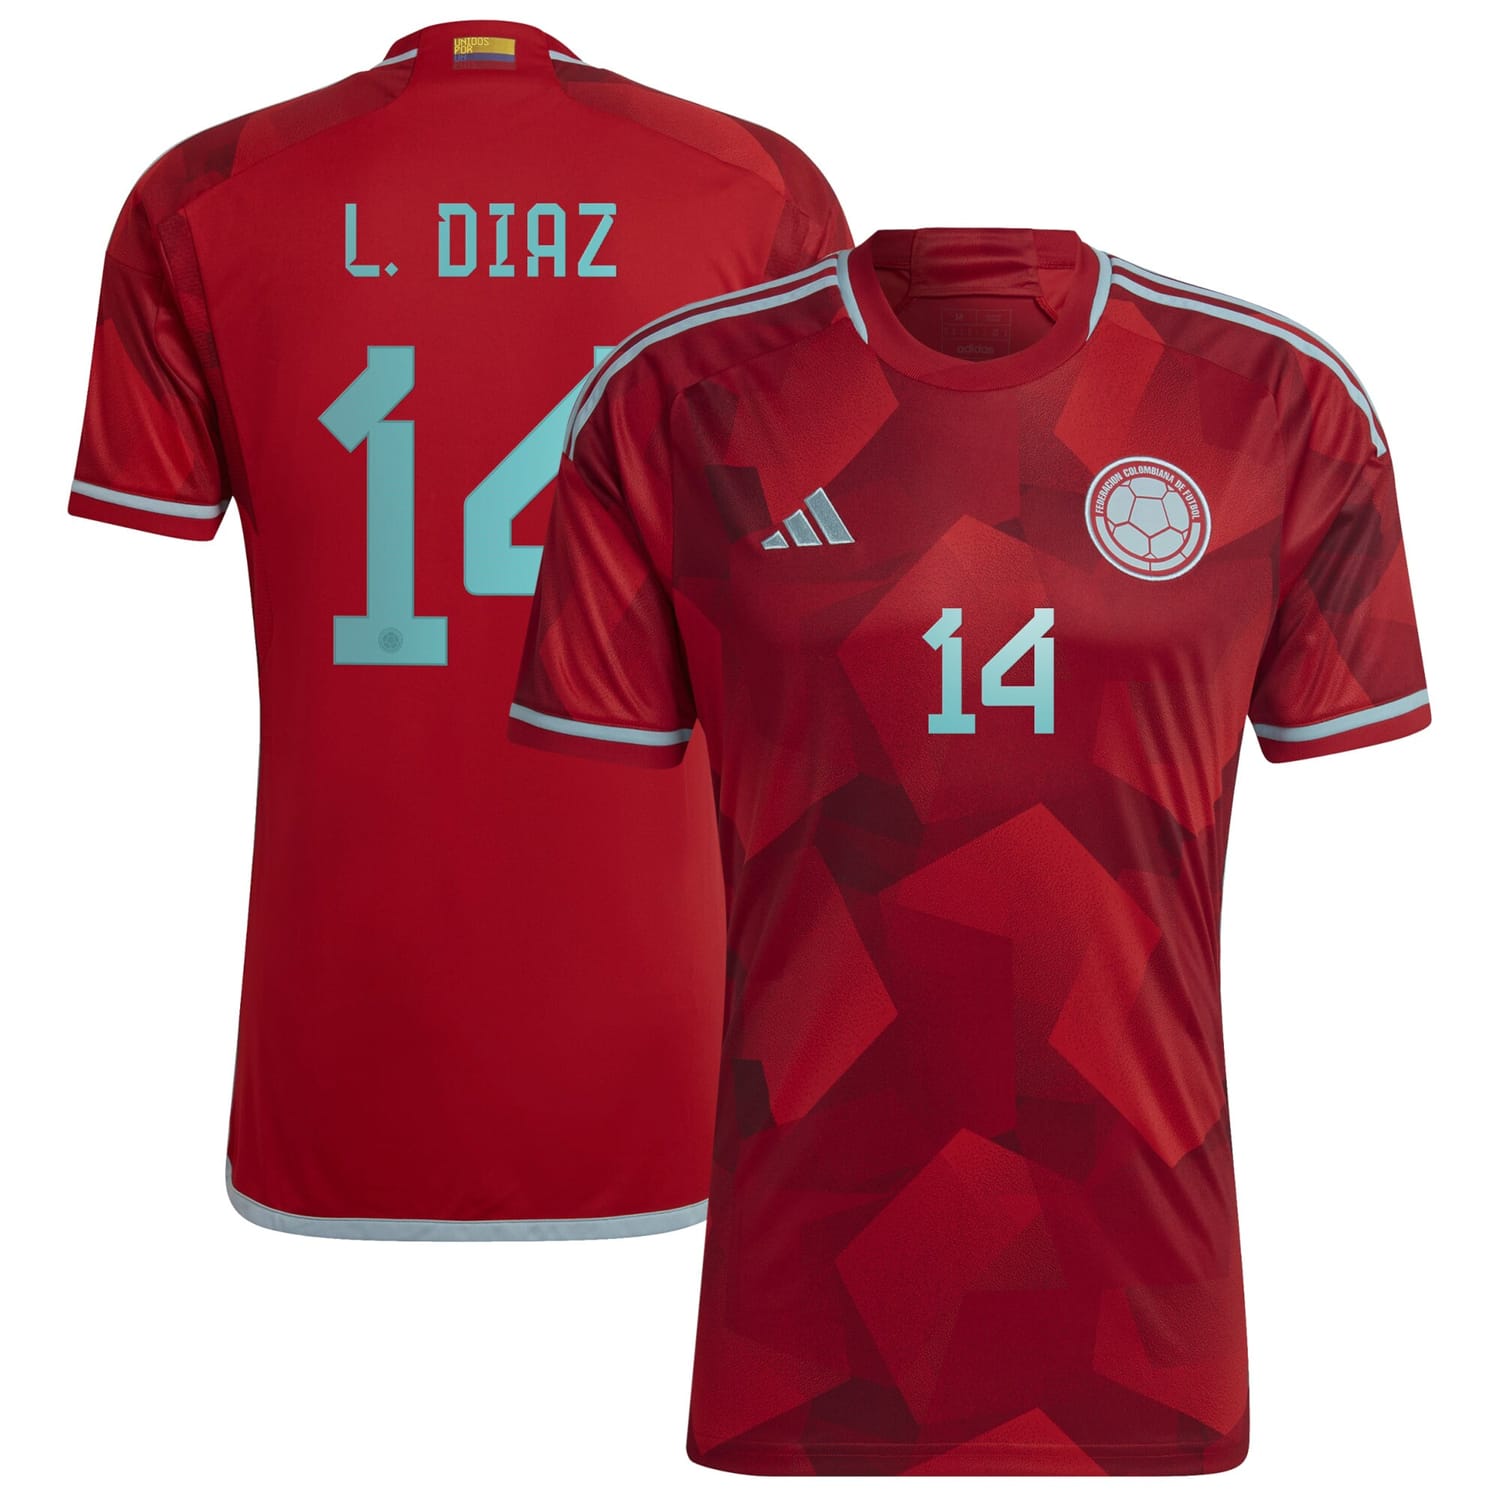 Colombia National Team Away Jersey Shirt Red 2022-23 player Luis Diaz printing for Men